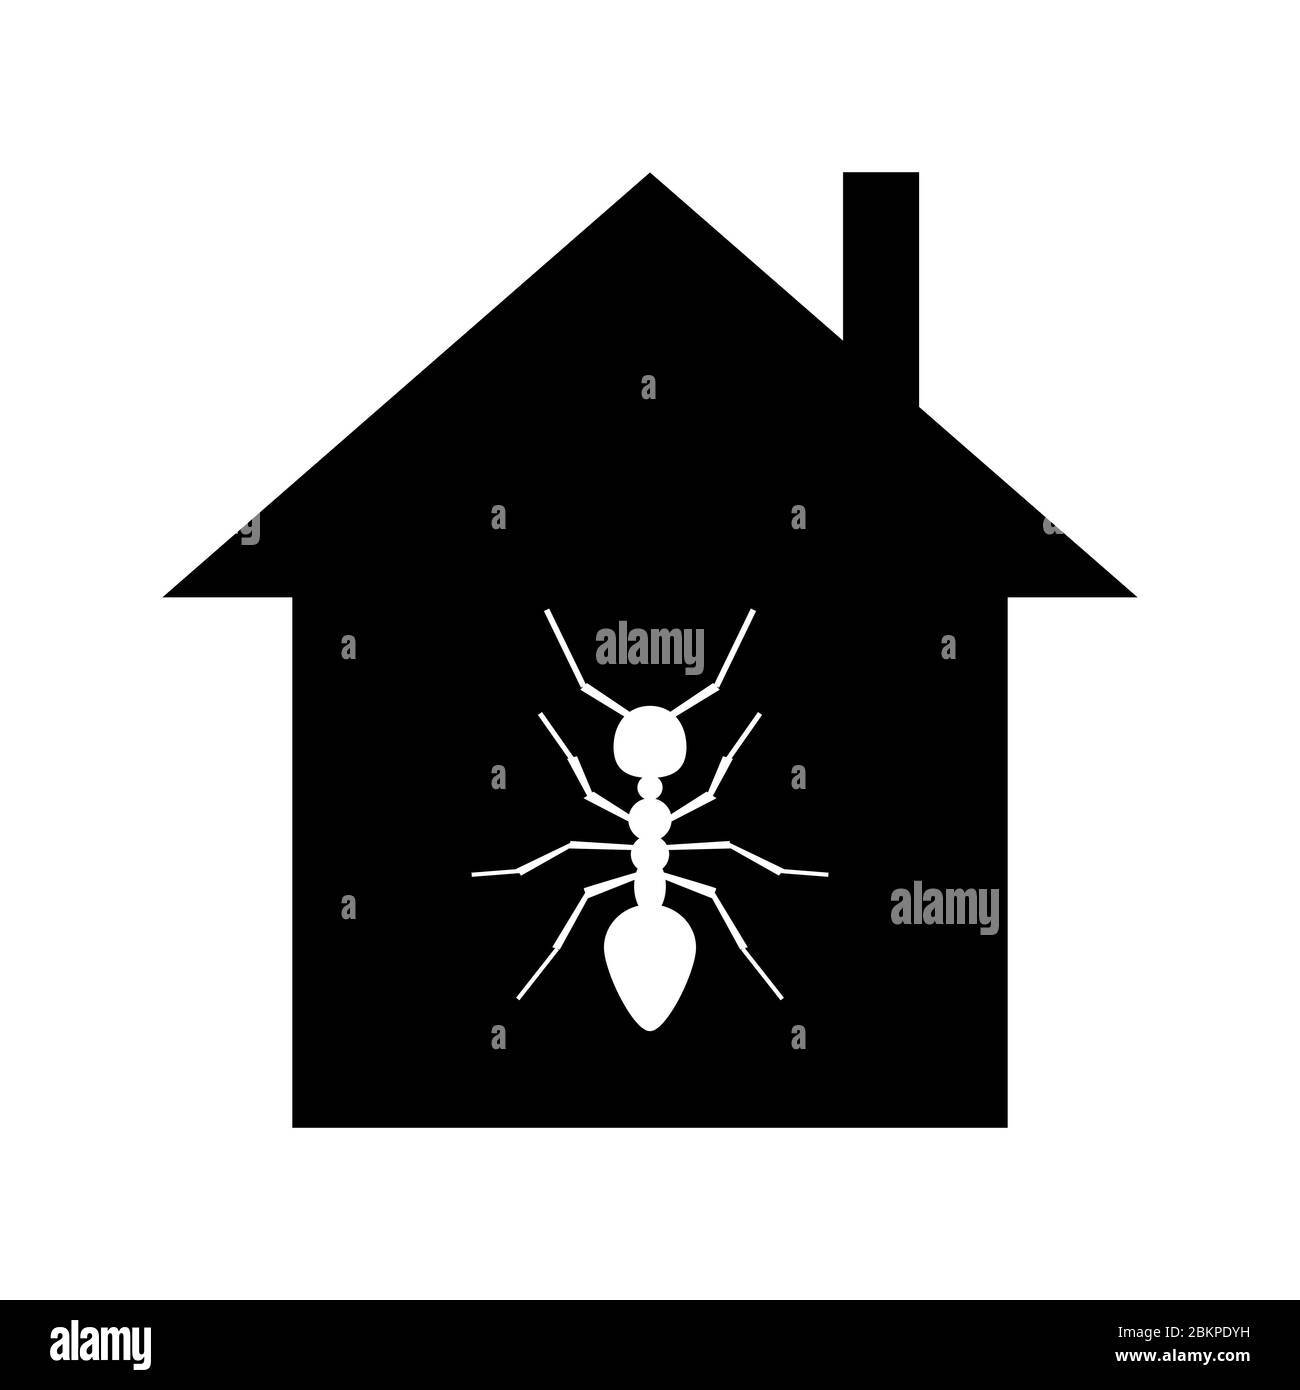 House attacked by ants or termites, minimalist flat vector illustration icon, symbol for insect damage Stock Vector